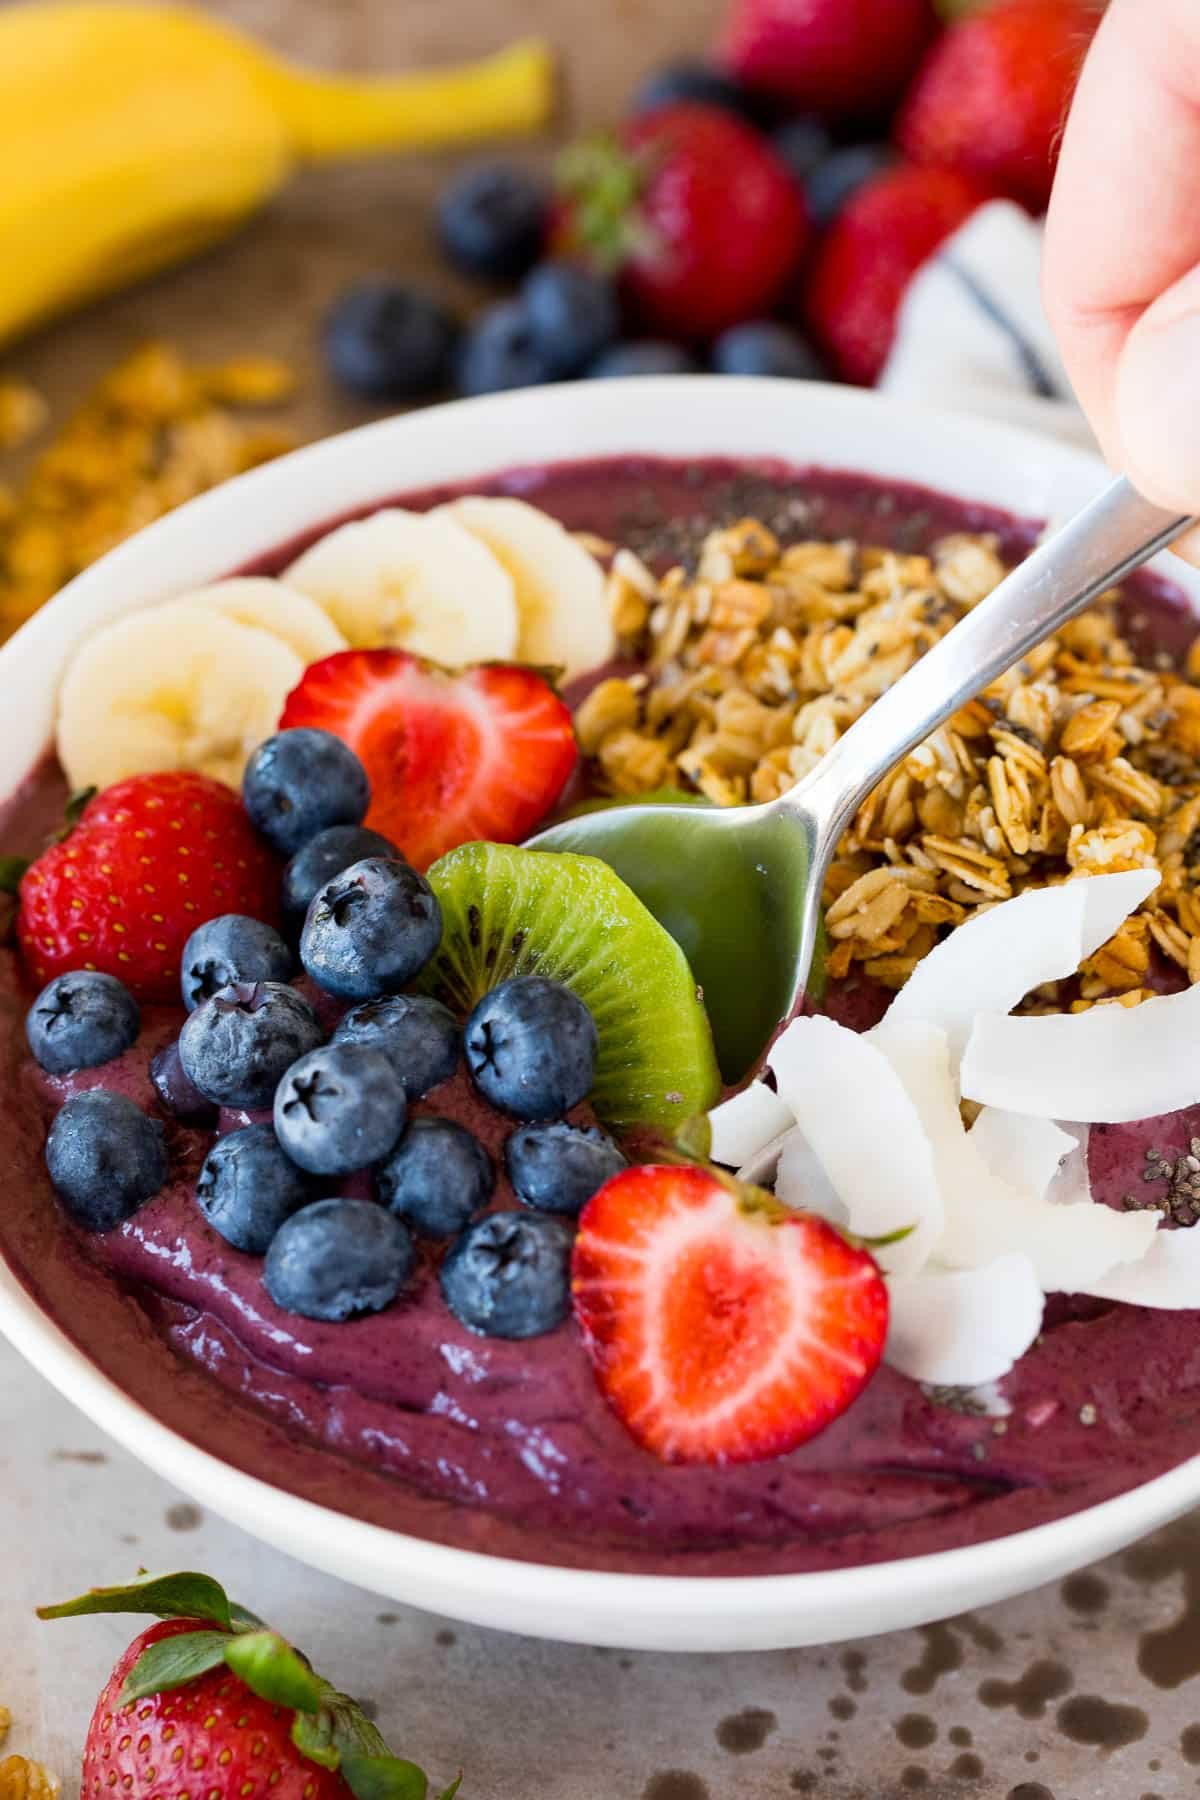 A spoon inside an acai bowl topped with berries.